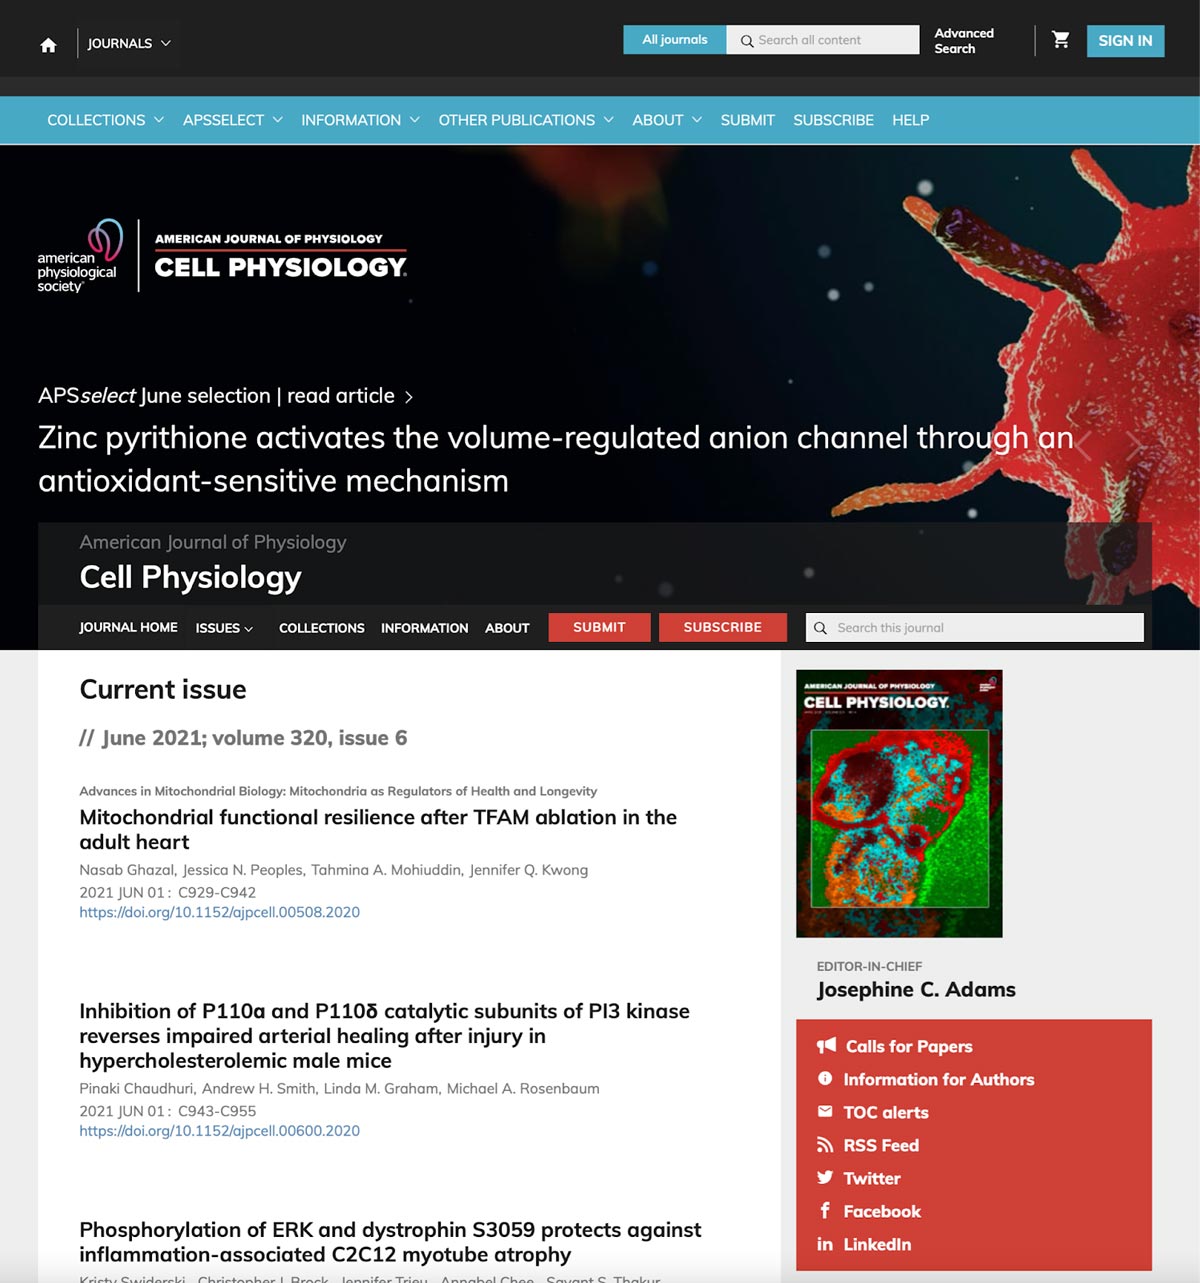 The American Journal of Physiology homepage